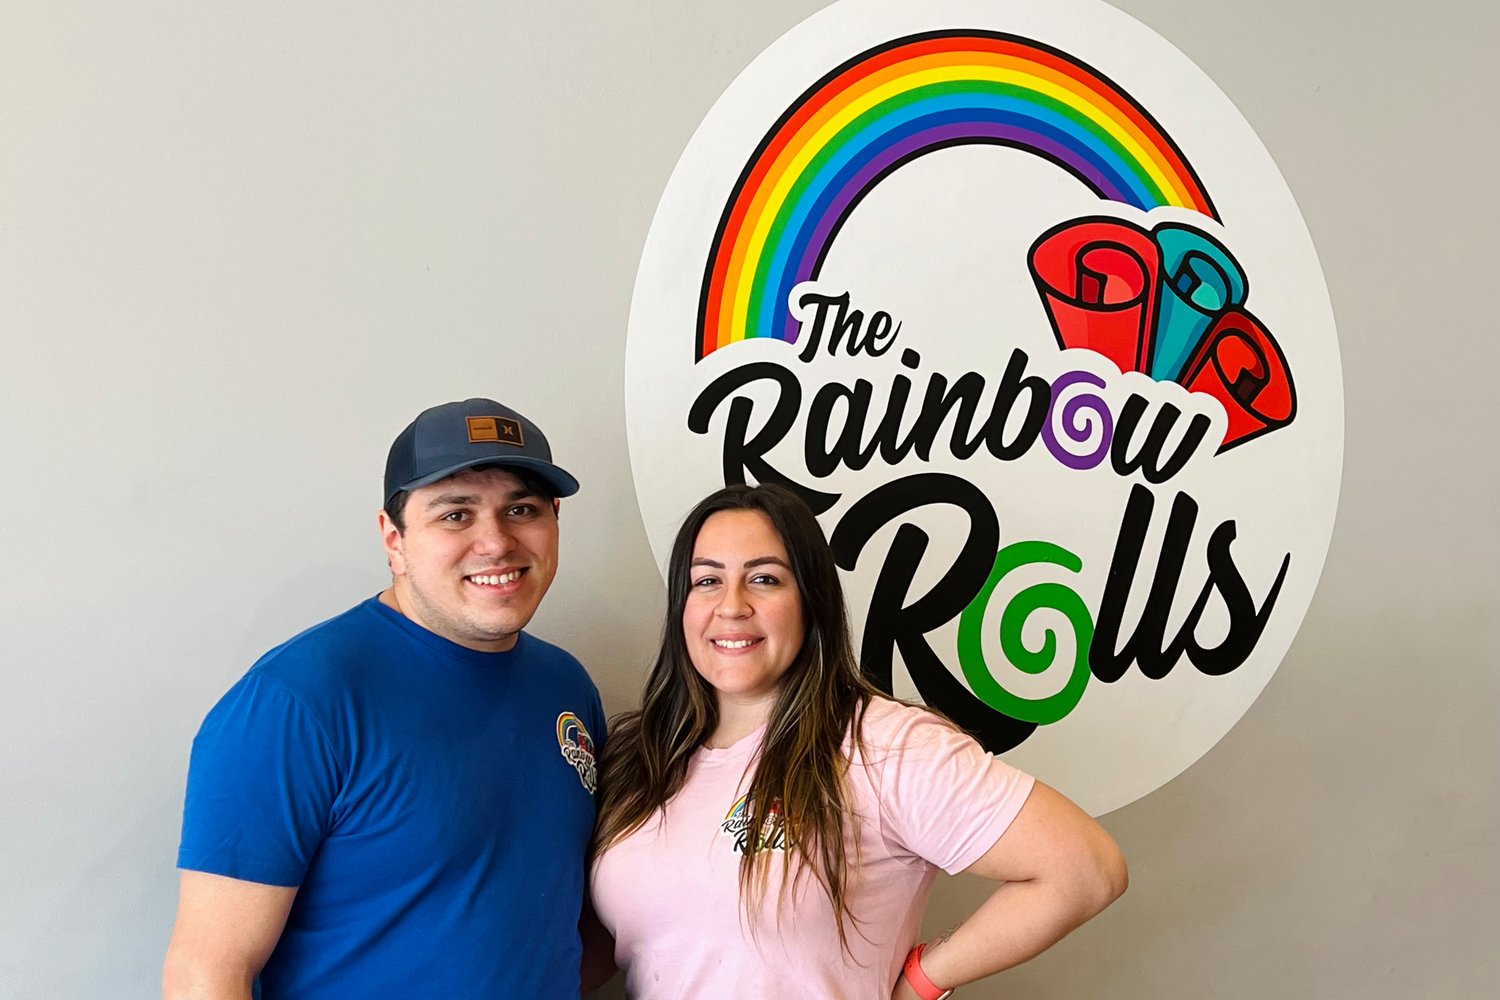 Evelyn and Rich Morales introduced rolled ice cream to Center Moriches Memorial Day weekend 2021. If all goes according to plan and Rainbow Scoops opens on schedule, this Memorial Day weekend will be twice as special.